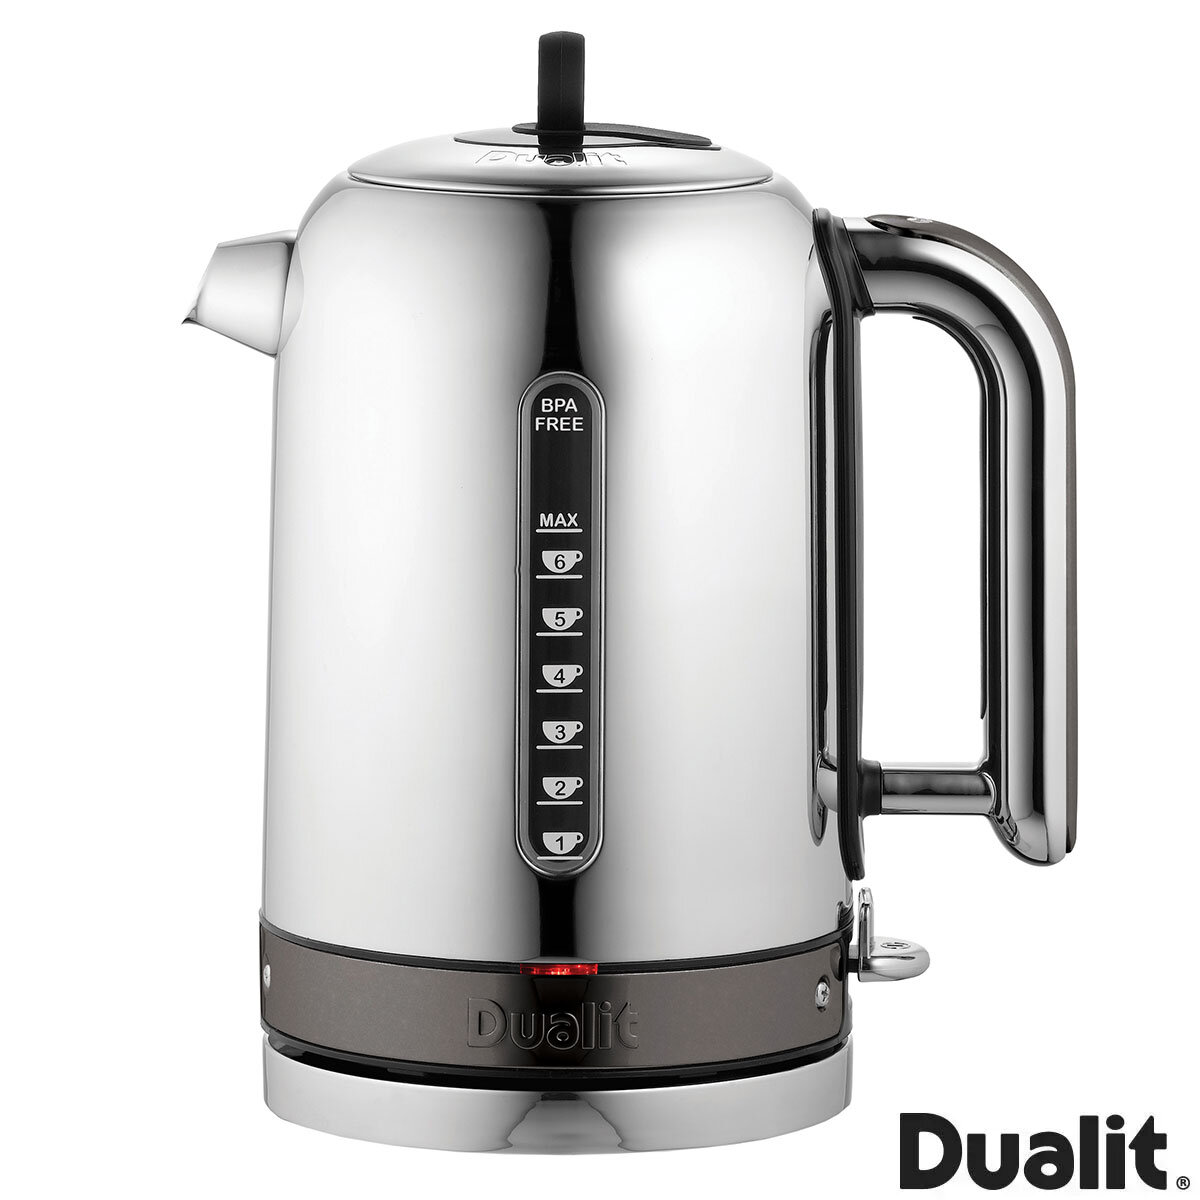 Front Profile of Dualit Kettle